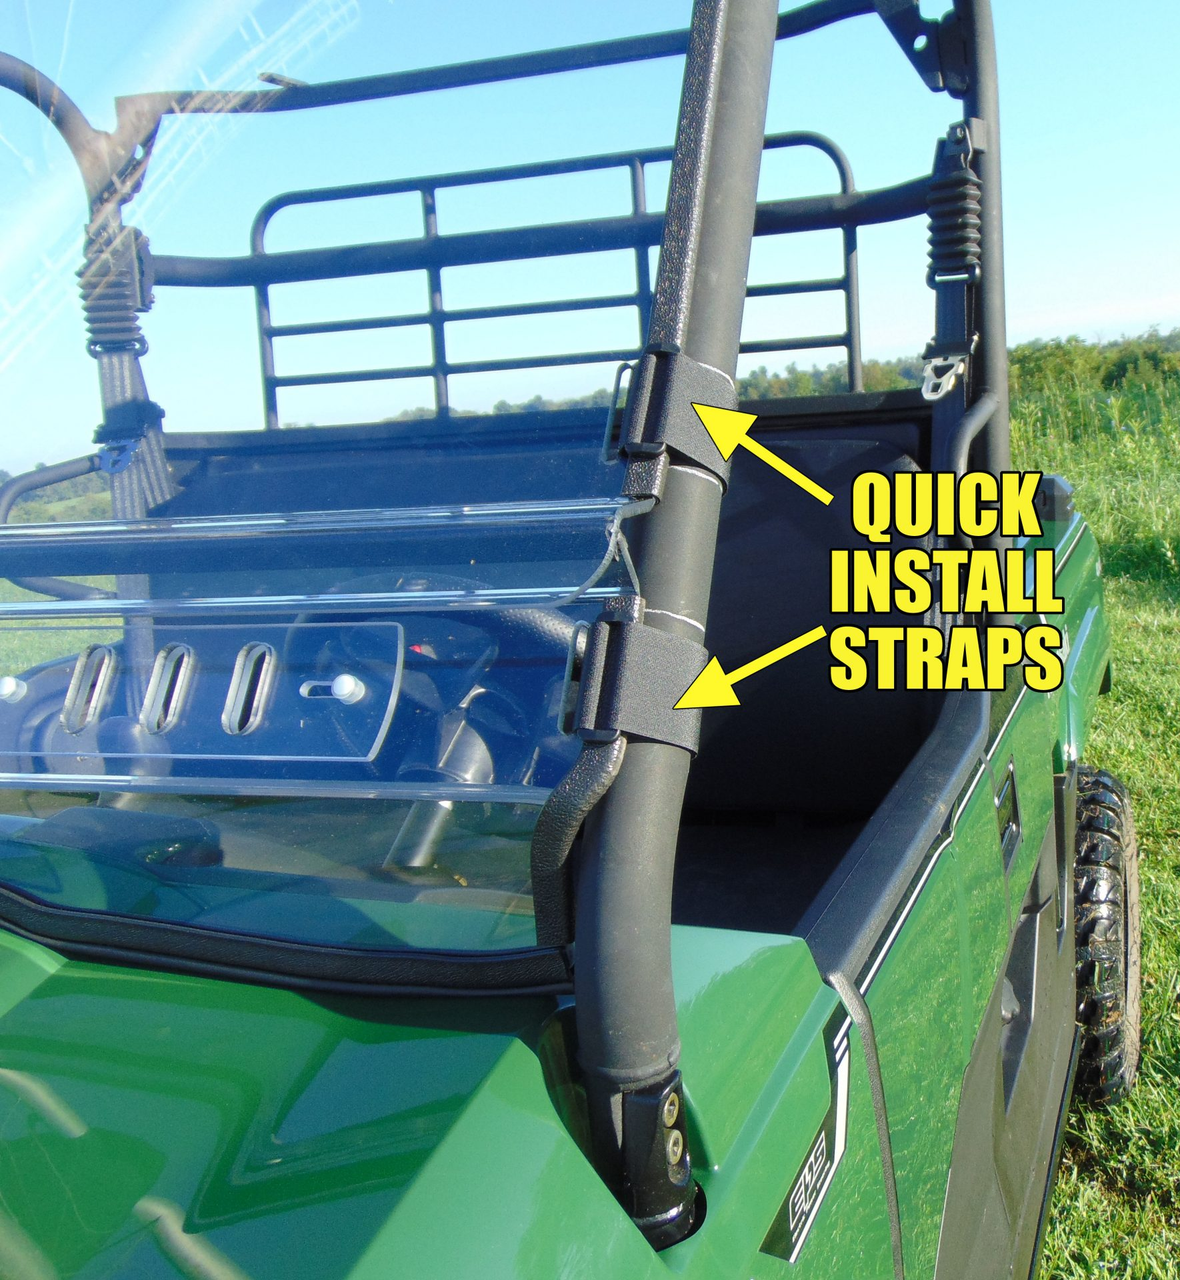 3 Star side x side Hisun HS 400 Coleman Outfitter UT400 windshield quick install straps